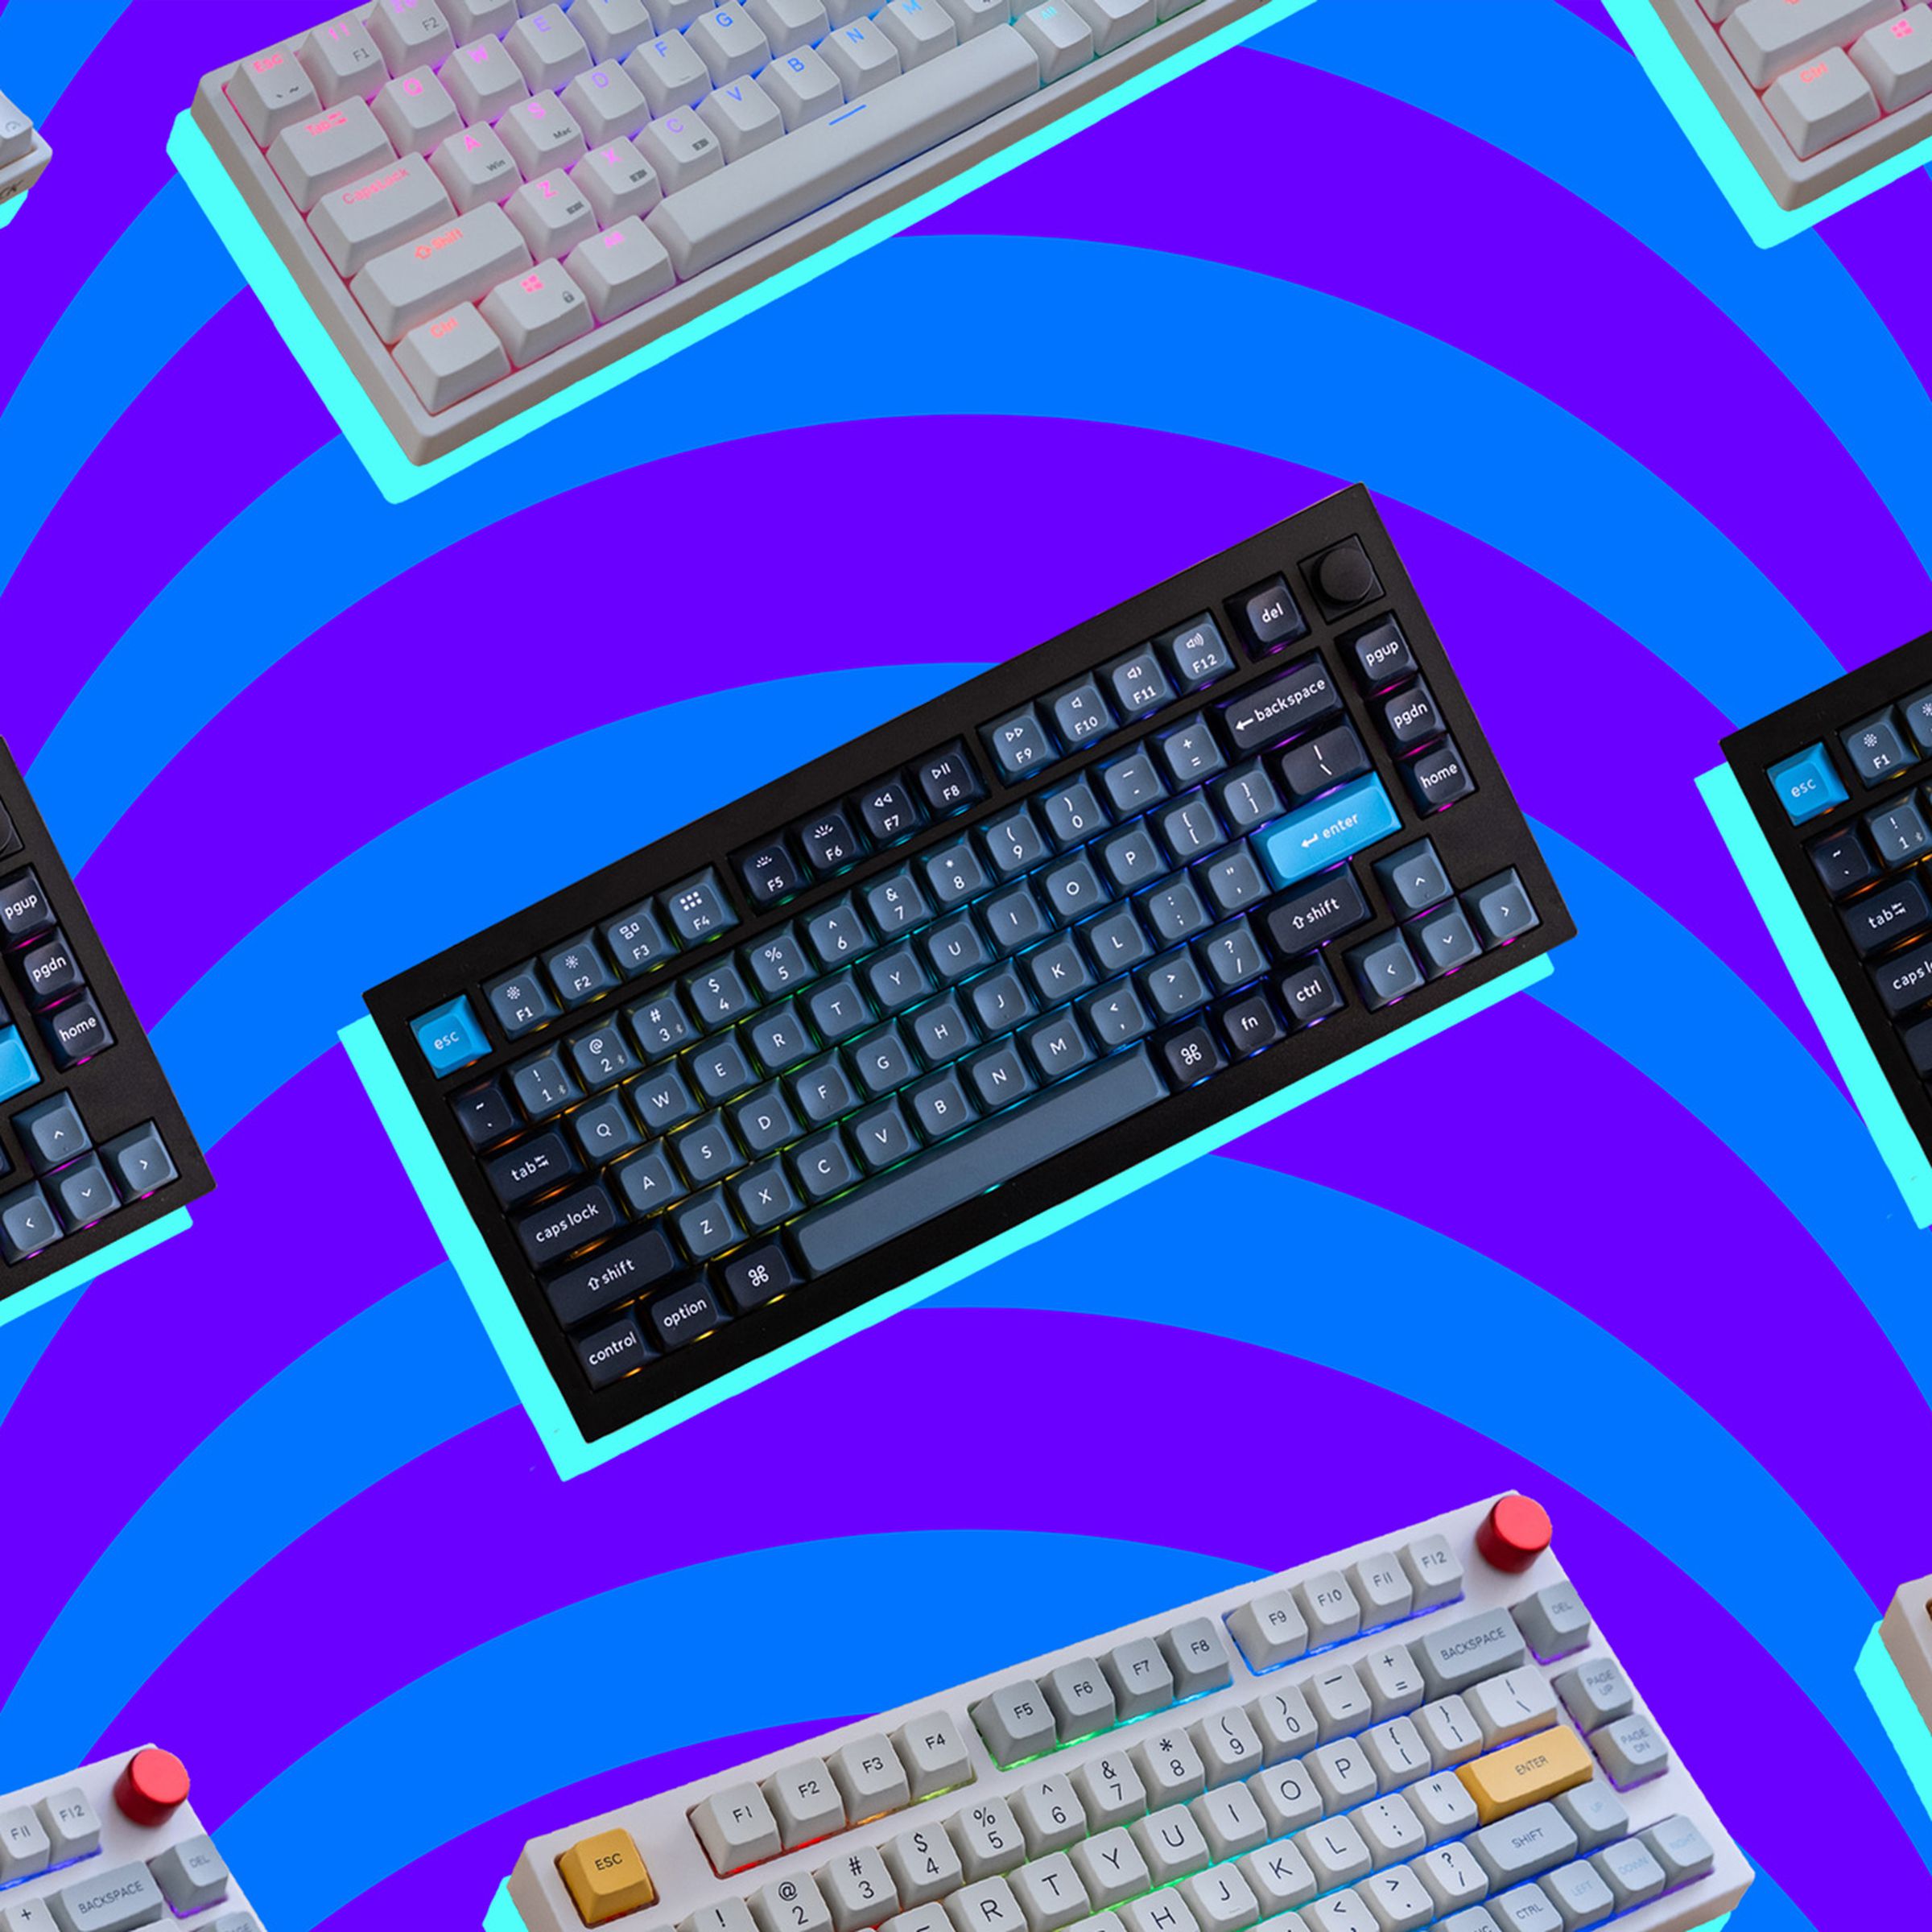 Several keyboards floating on an illustrated background.